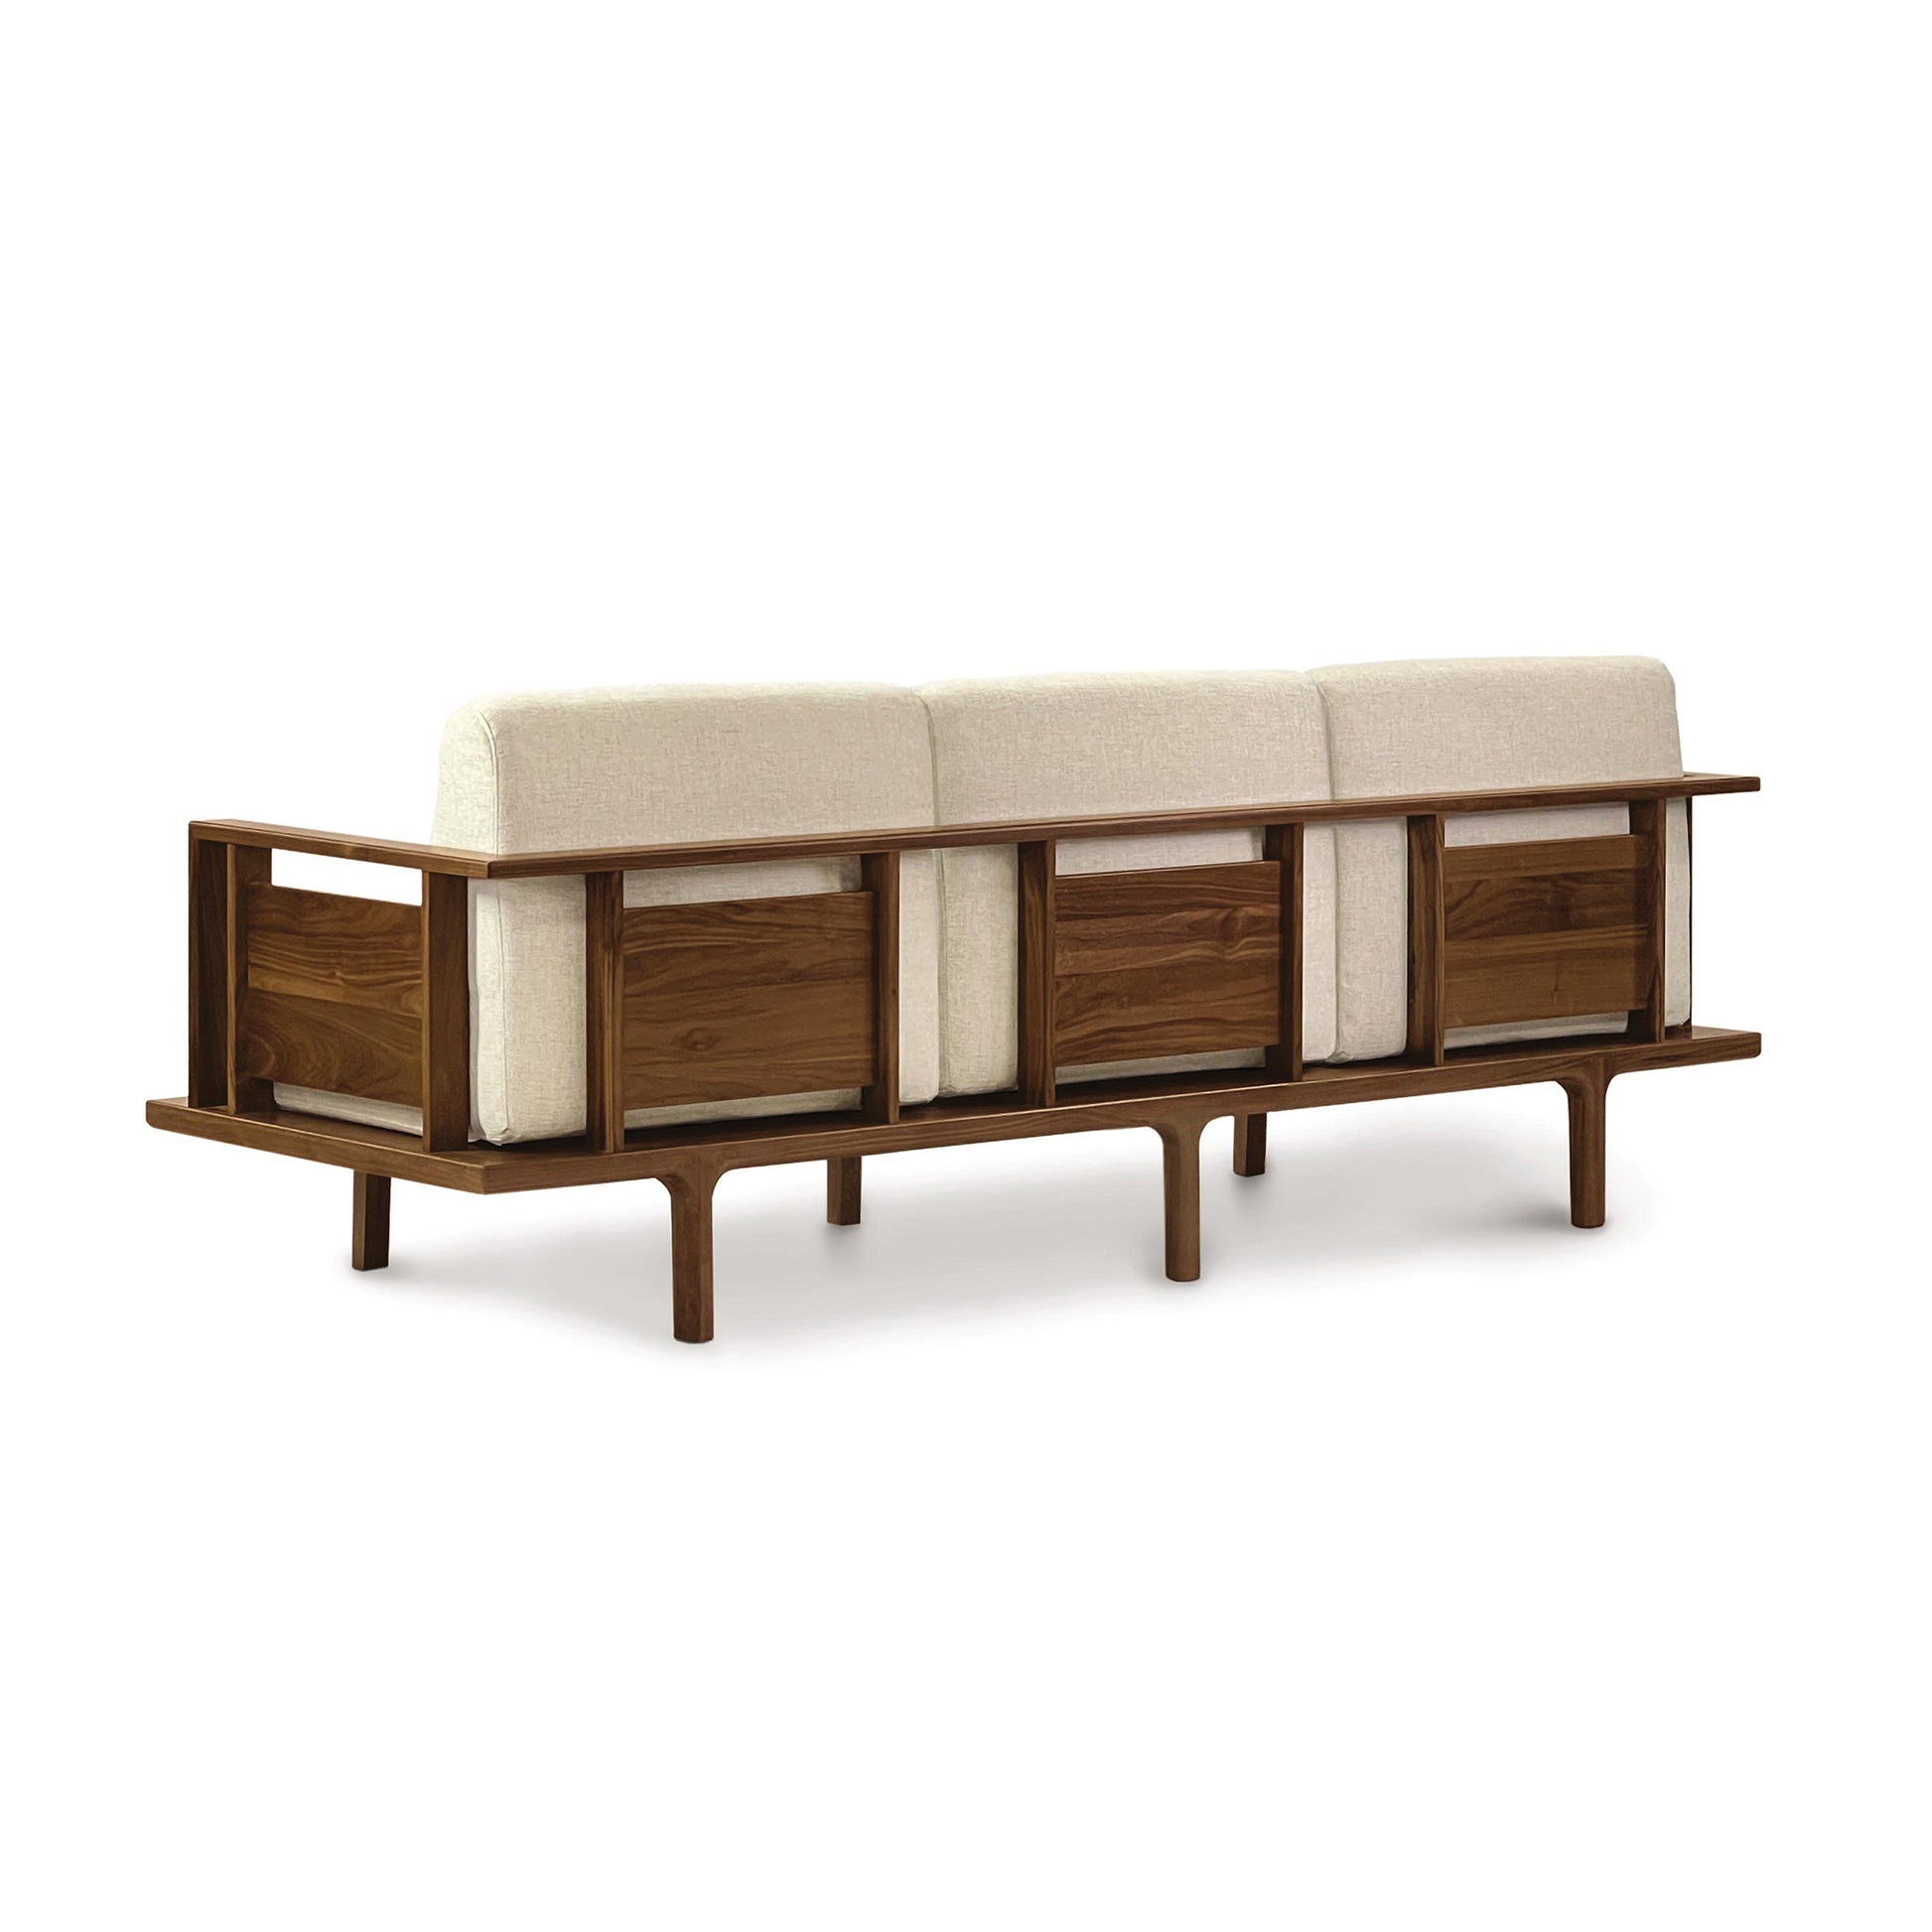 A Sierra Walnut Upholstered Sofa by Copeland Furniture with wooden legs and a white cushion.